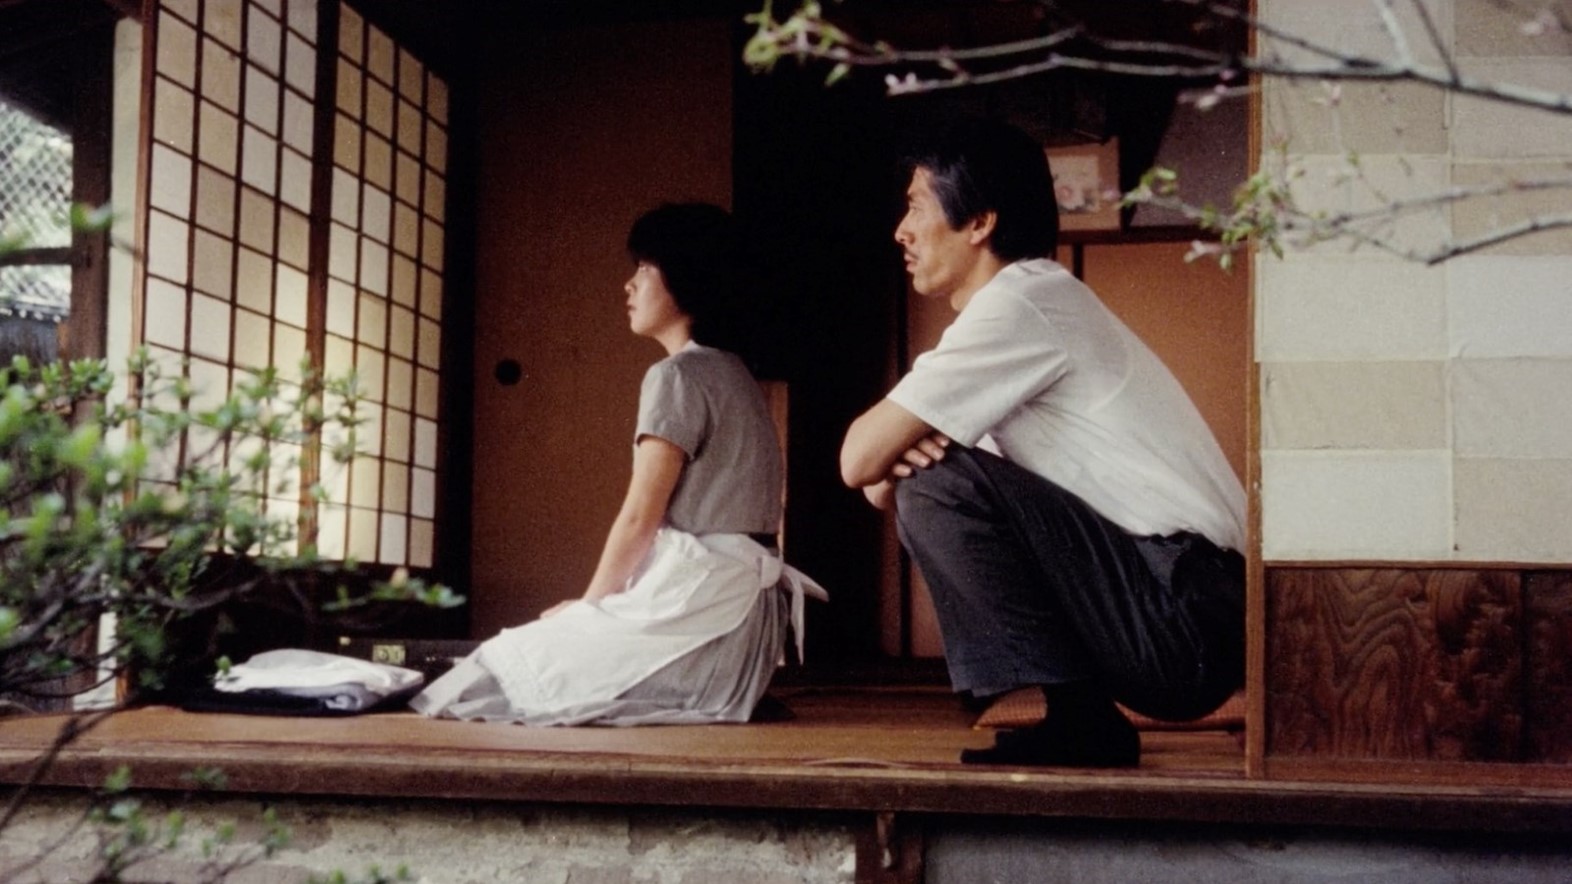 Japan Pink Movie - The Erotic Cinema of Japan in Five Boundary-Pushing Films | AnOther